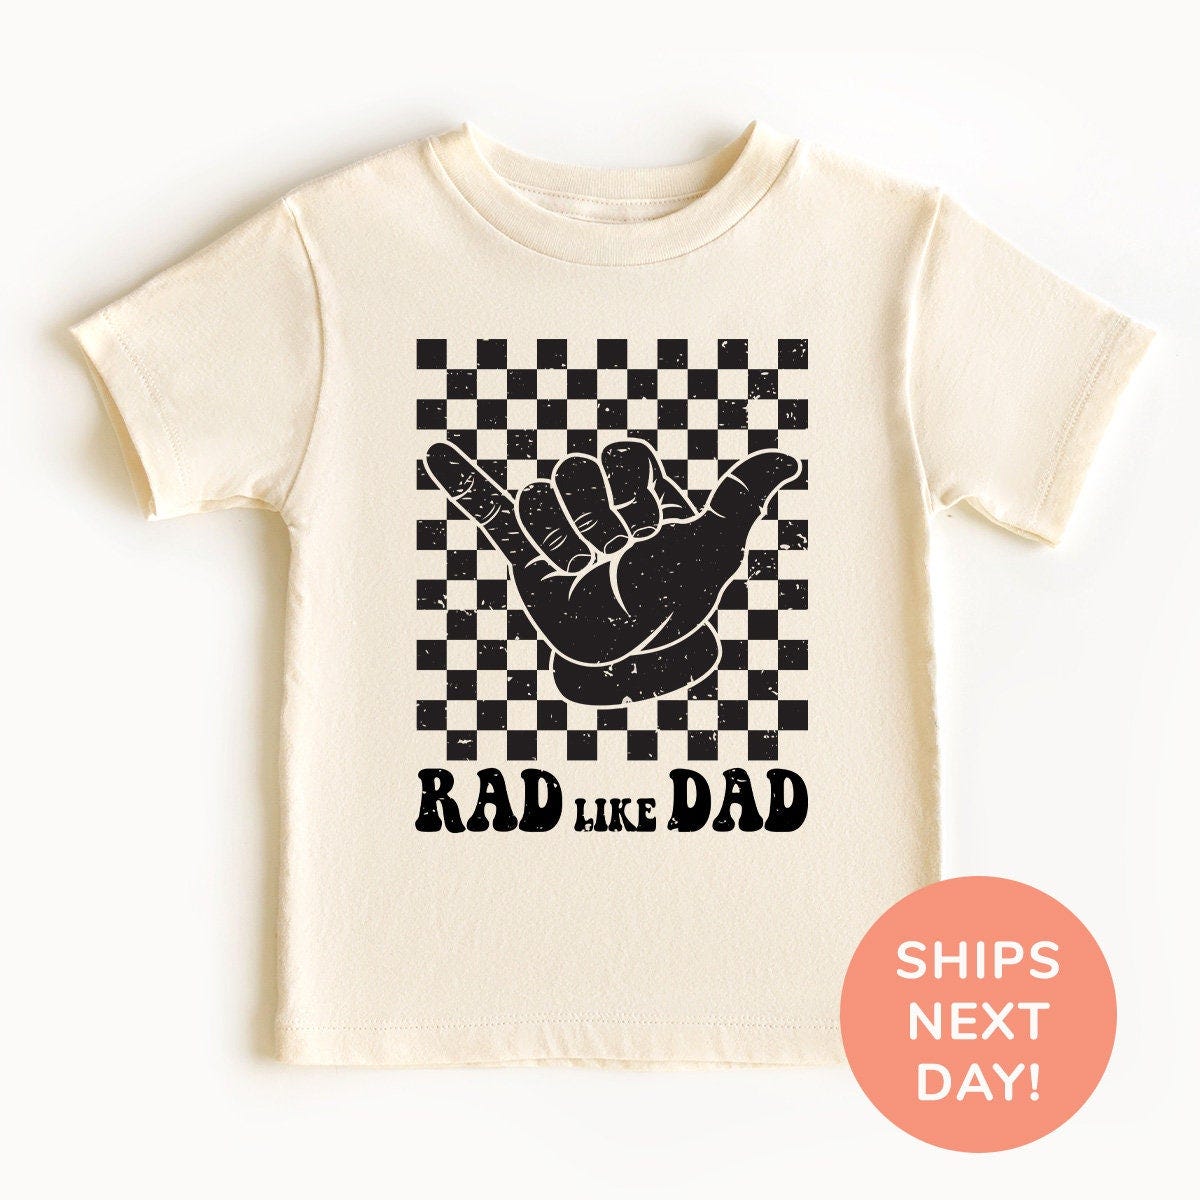 Rad Like Dad Shirt, Onesie® for Kids, Toddler & Youth Shirt, Retro Kids Shirt, Cute Baby Shirt for Father’s Day, Daddy’s Girl and Boy Shirt